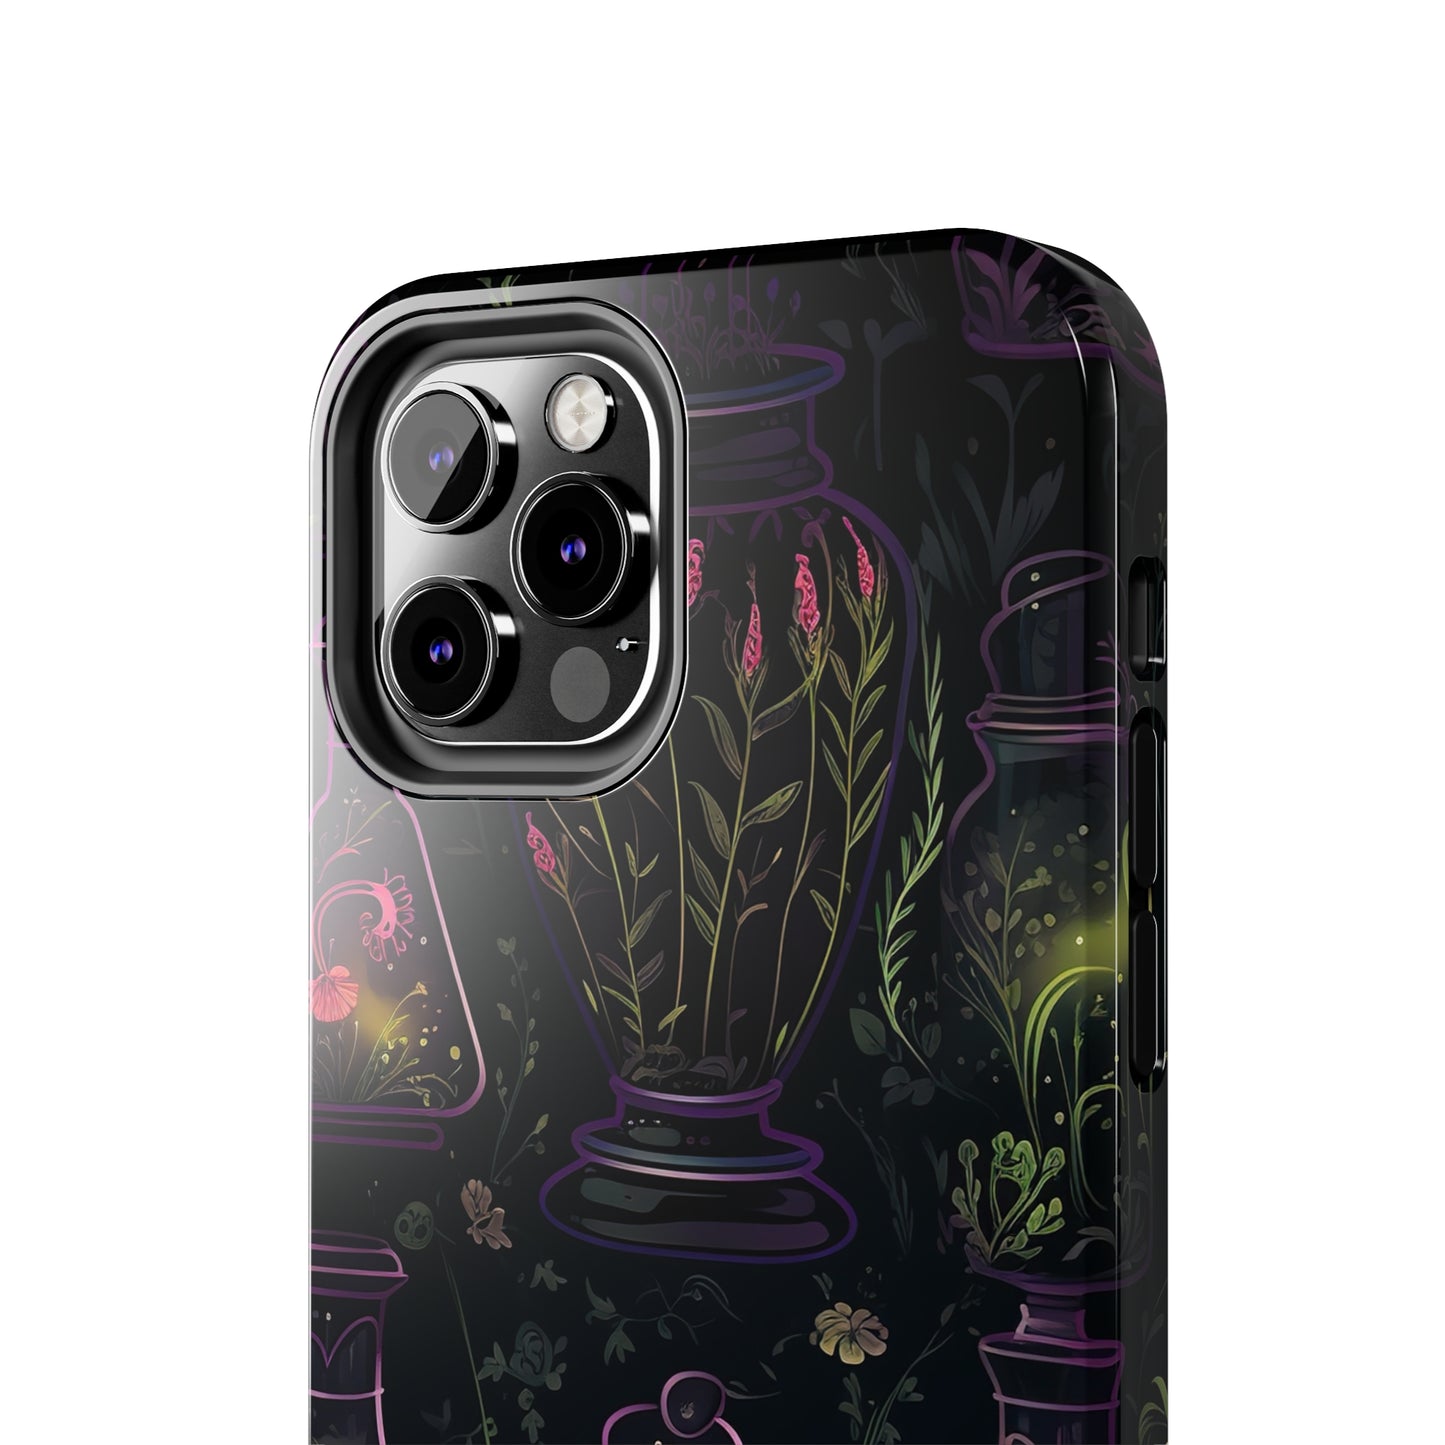 Dark Forest Skull Tough iPhone Cases | Spooky and Eerie Tincture / Potion Design | Durable and Protective Phone Case | Impact-Resistant